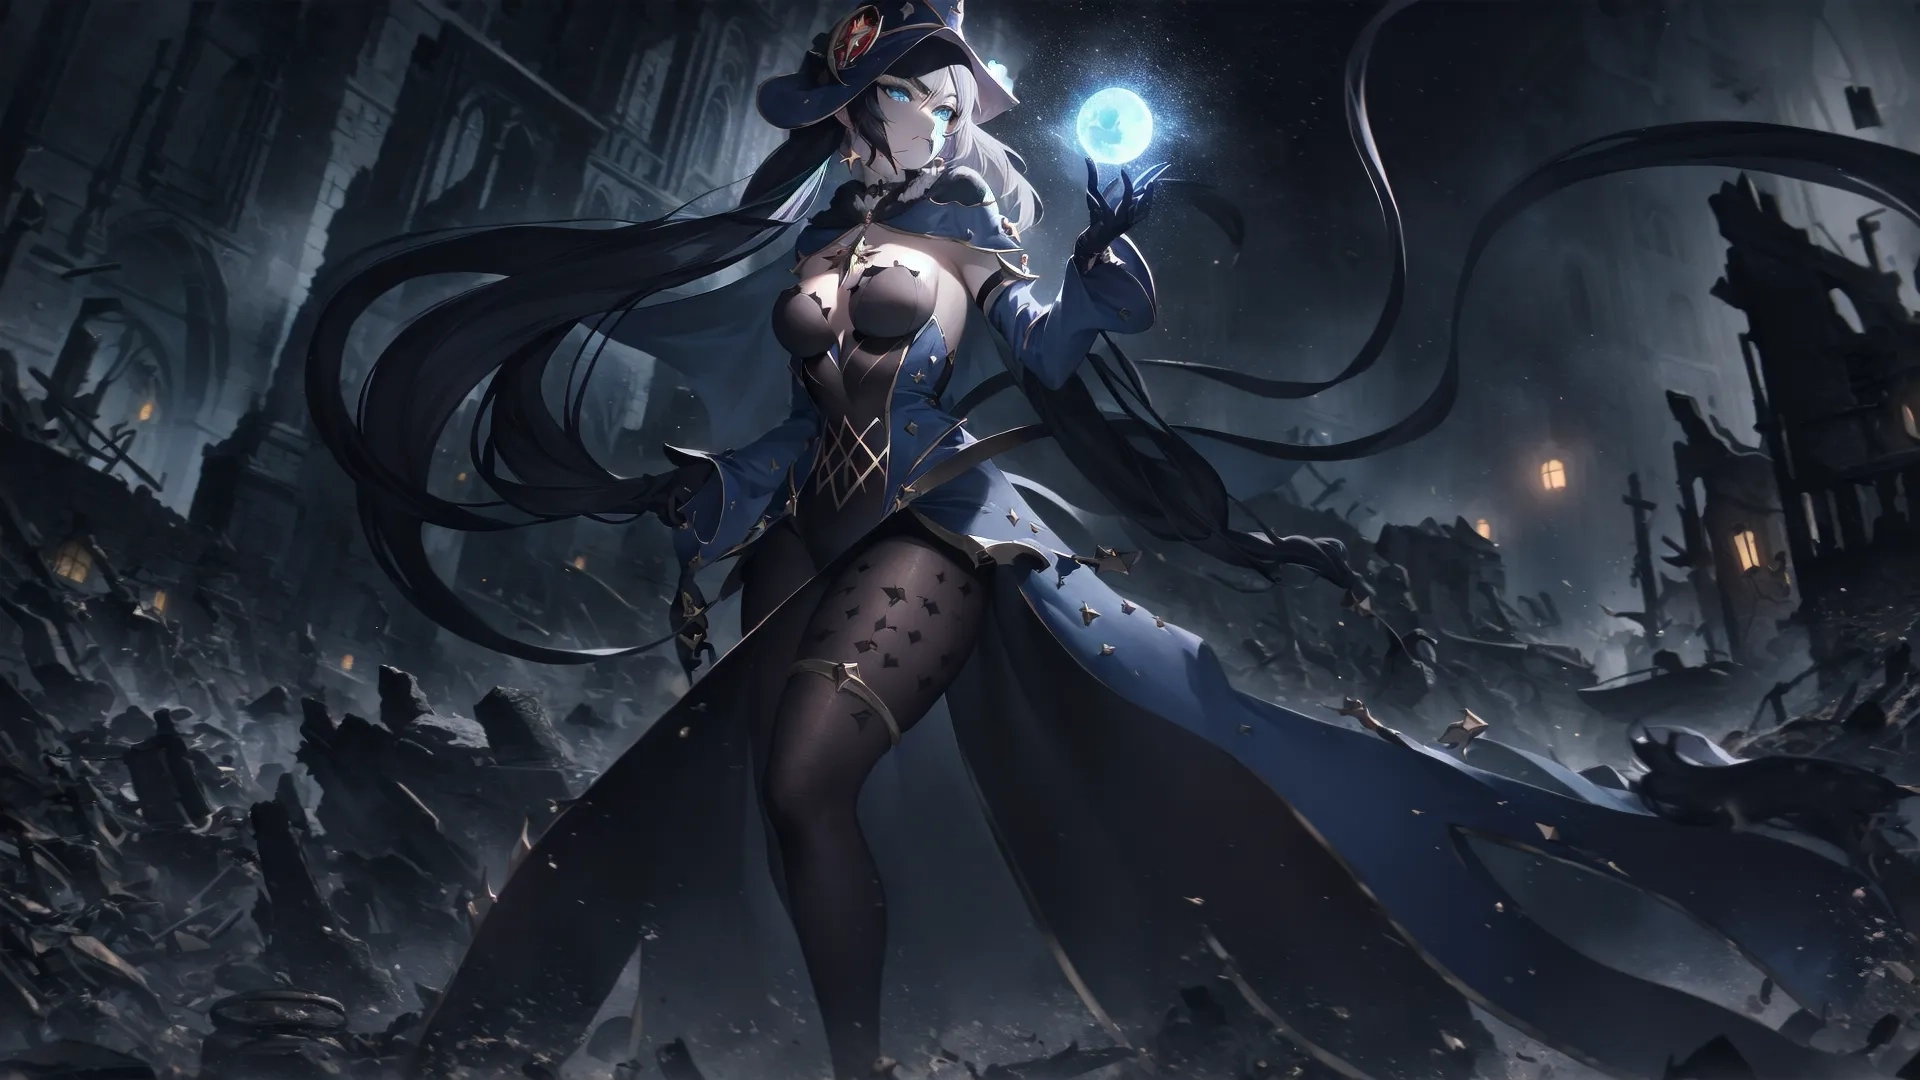 bloodstaaver wallpaper in an evil world, and her caped holding a glowing flame ball is standing among an icy city with dark buildings
